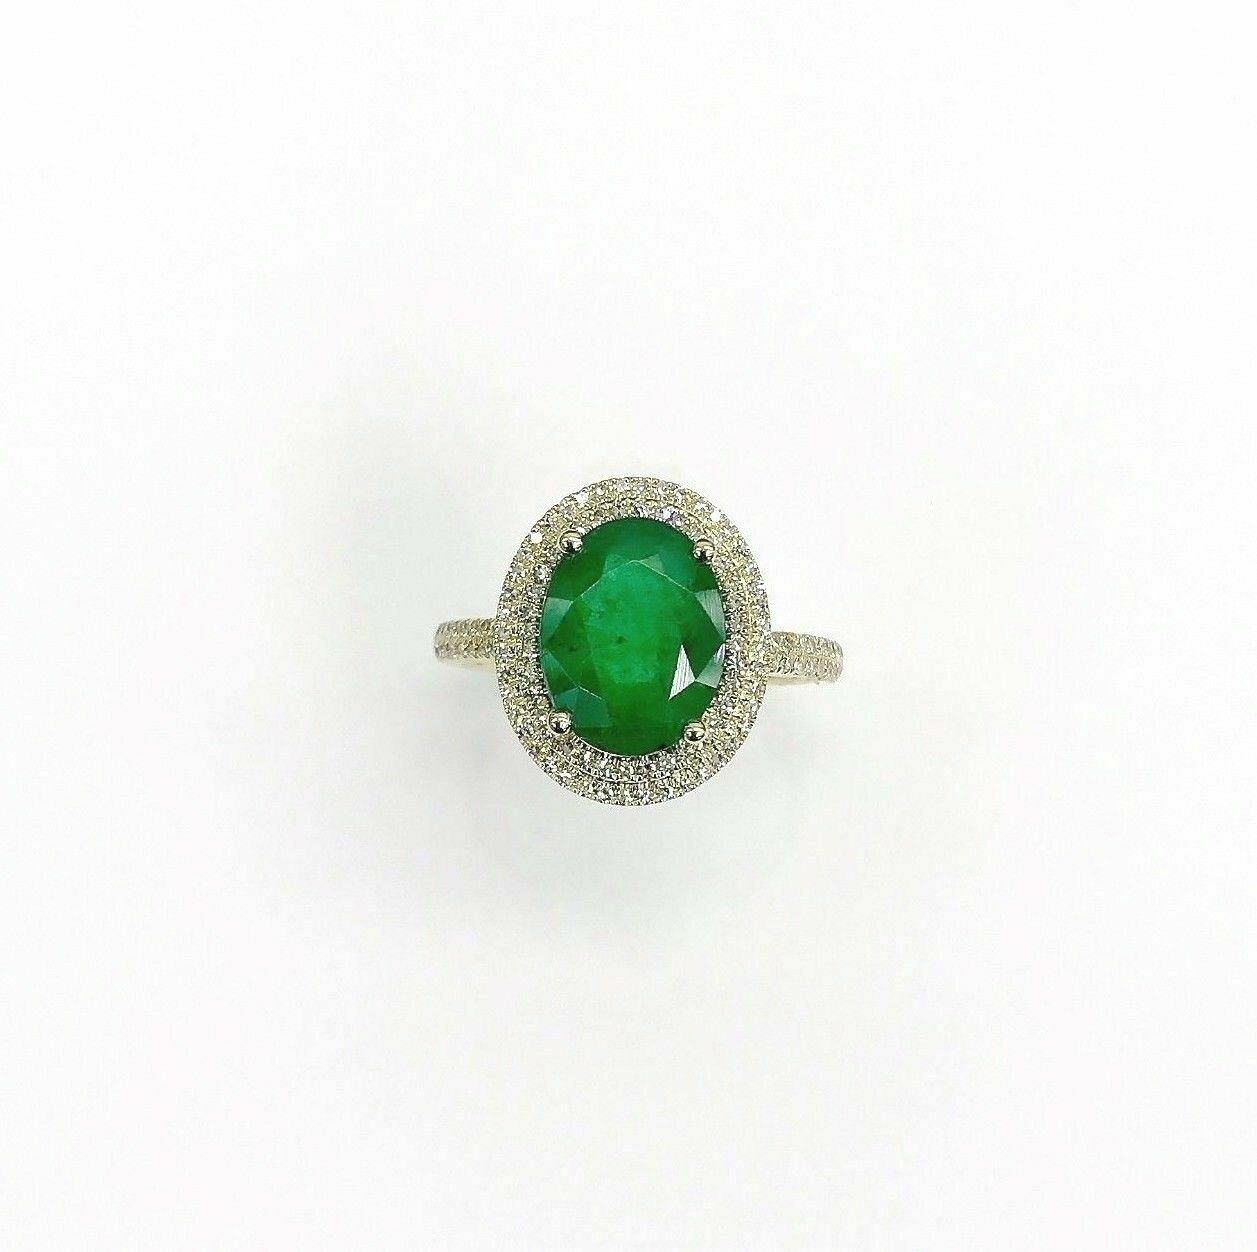 2.95 Carats t.w. Diamond and Emerald Halo Ring Emerald is 2.60 Carats May Stone